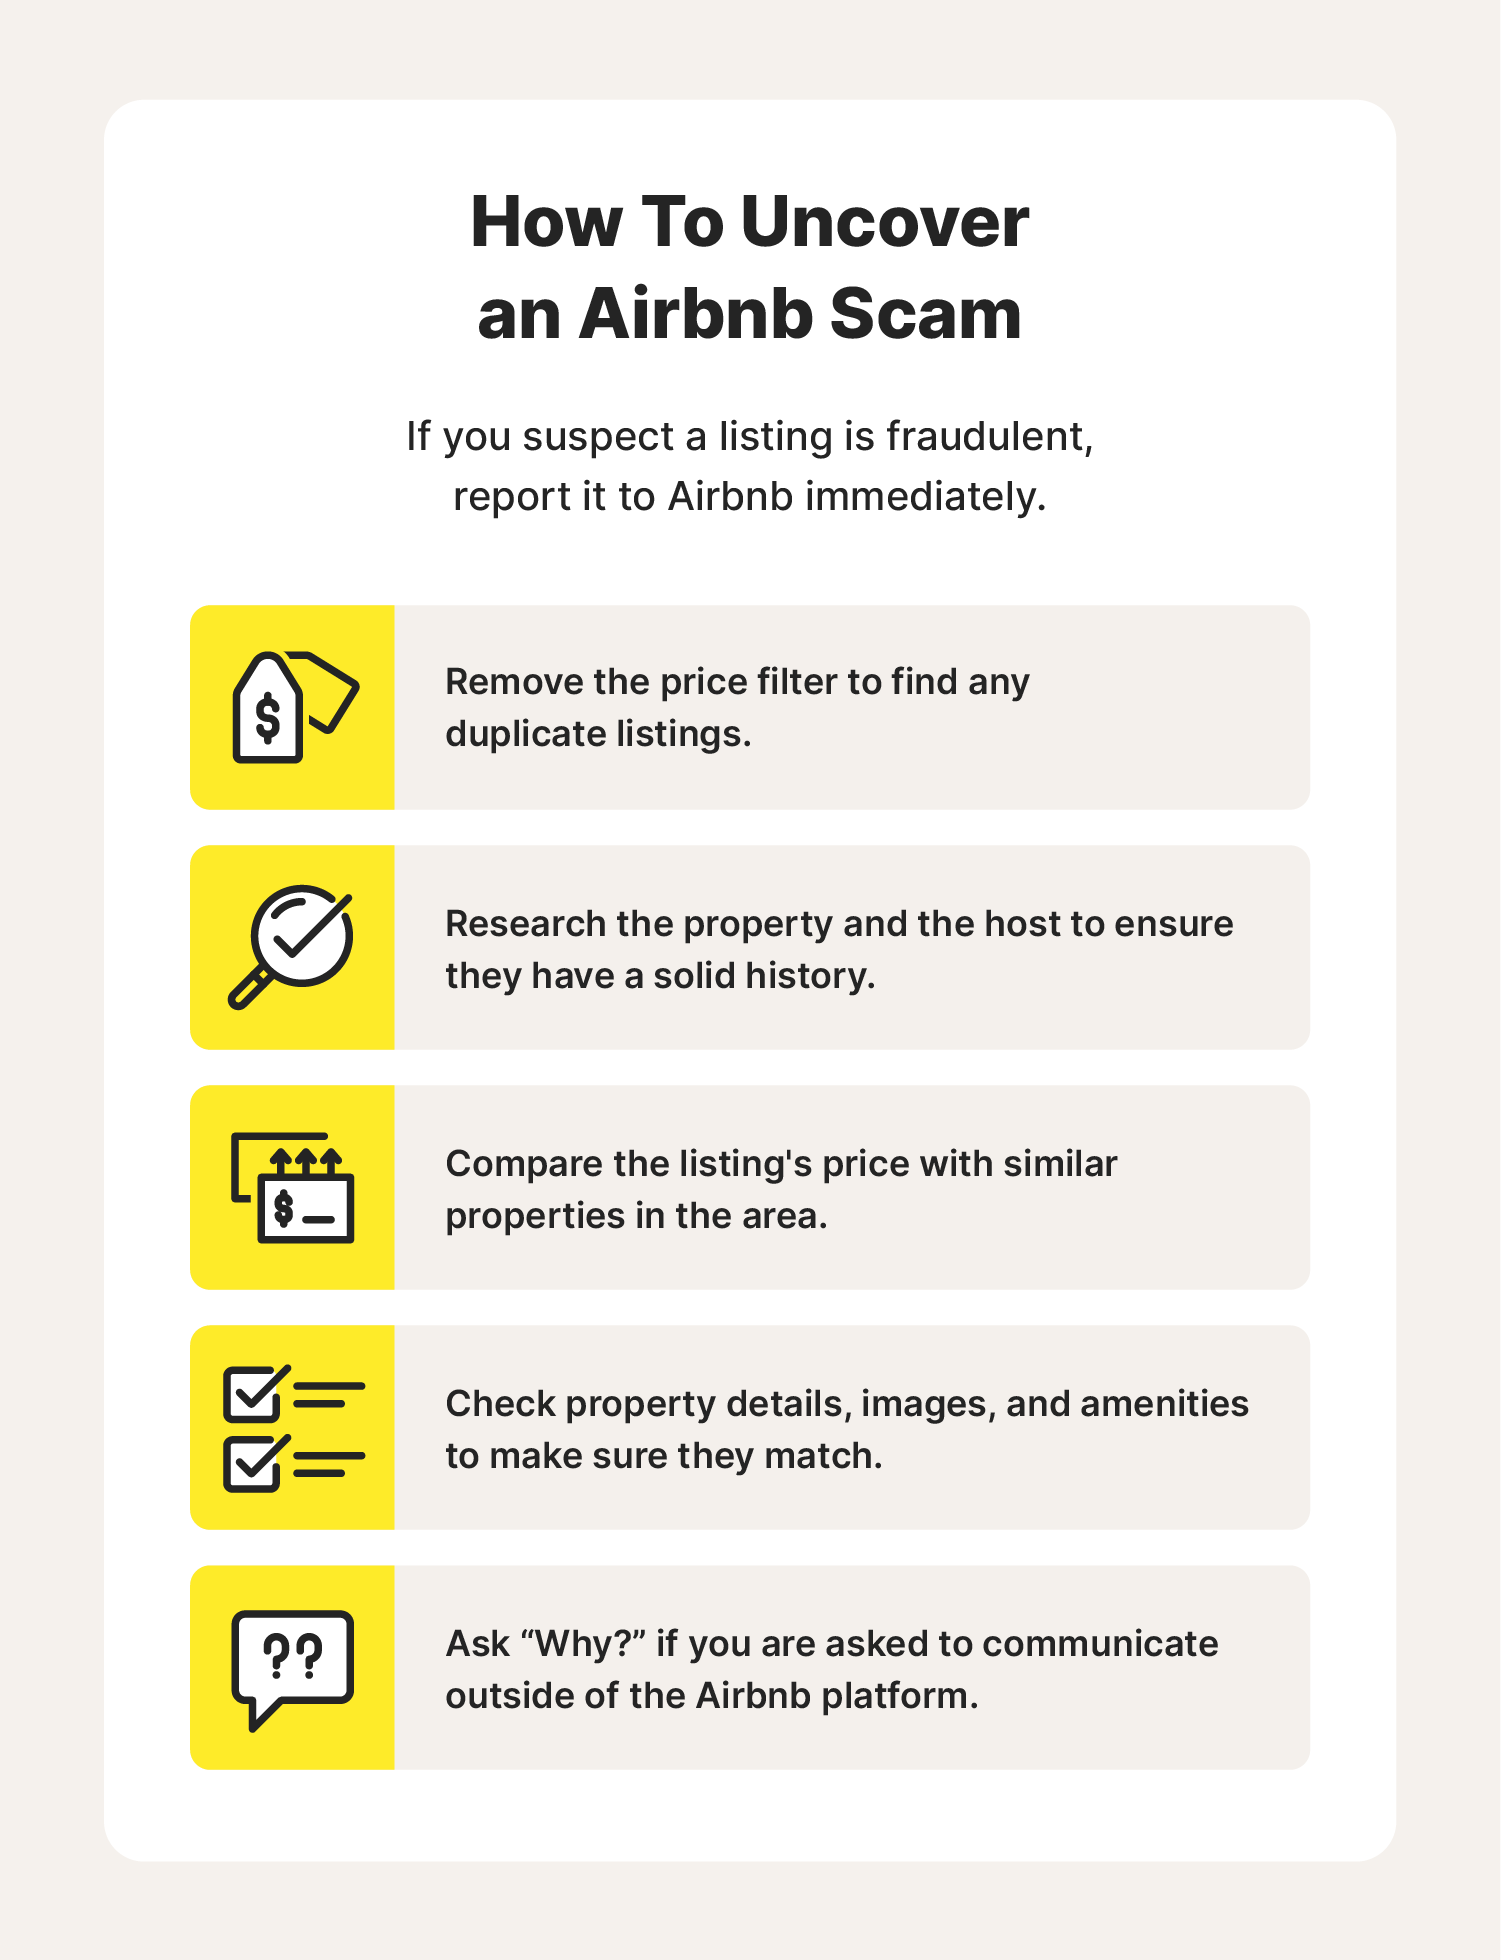 A graphic showcases five steps you should follow to uncover an Airbnb scam. 